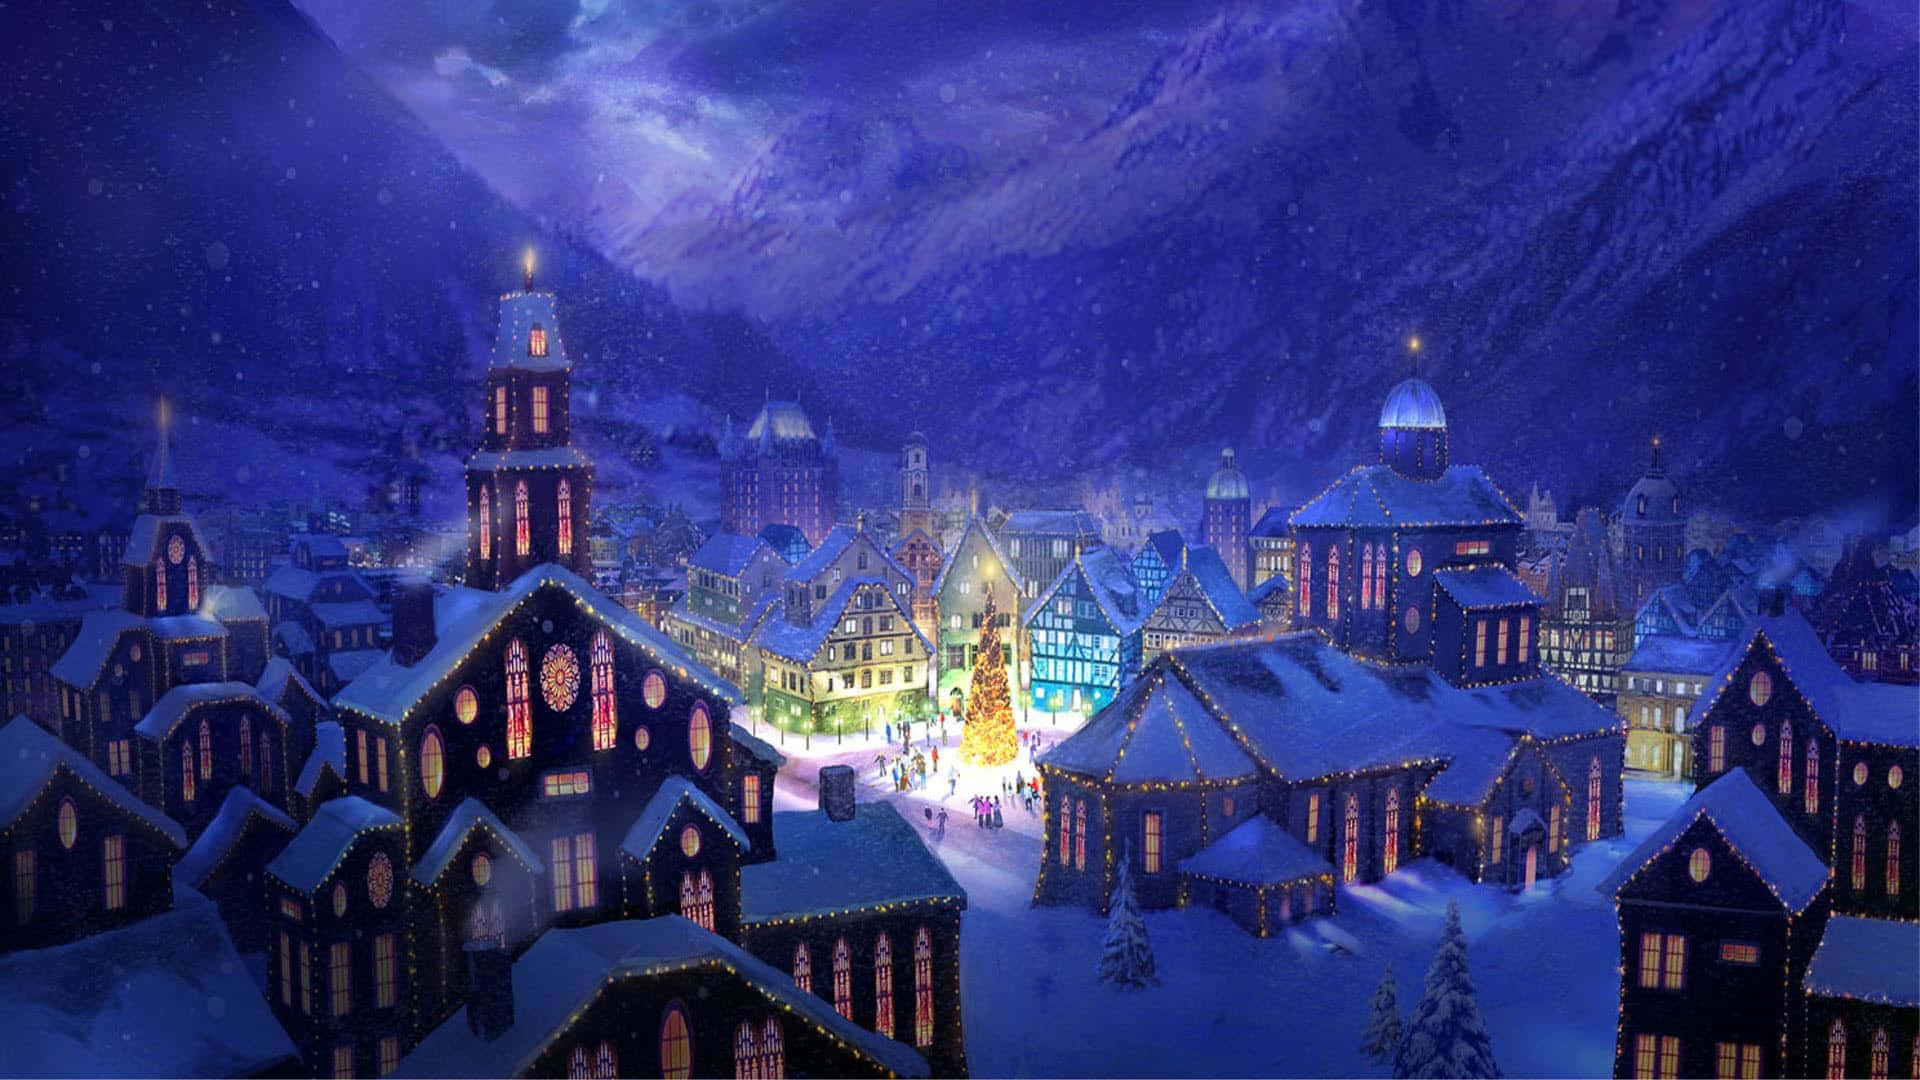 Celebrate the Holidays with a Trip through a Magical Christmas Village Wallpaper